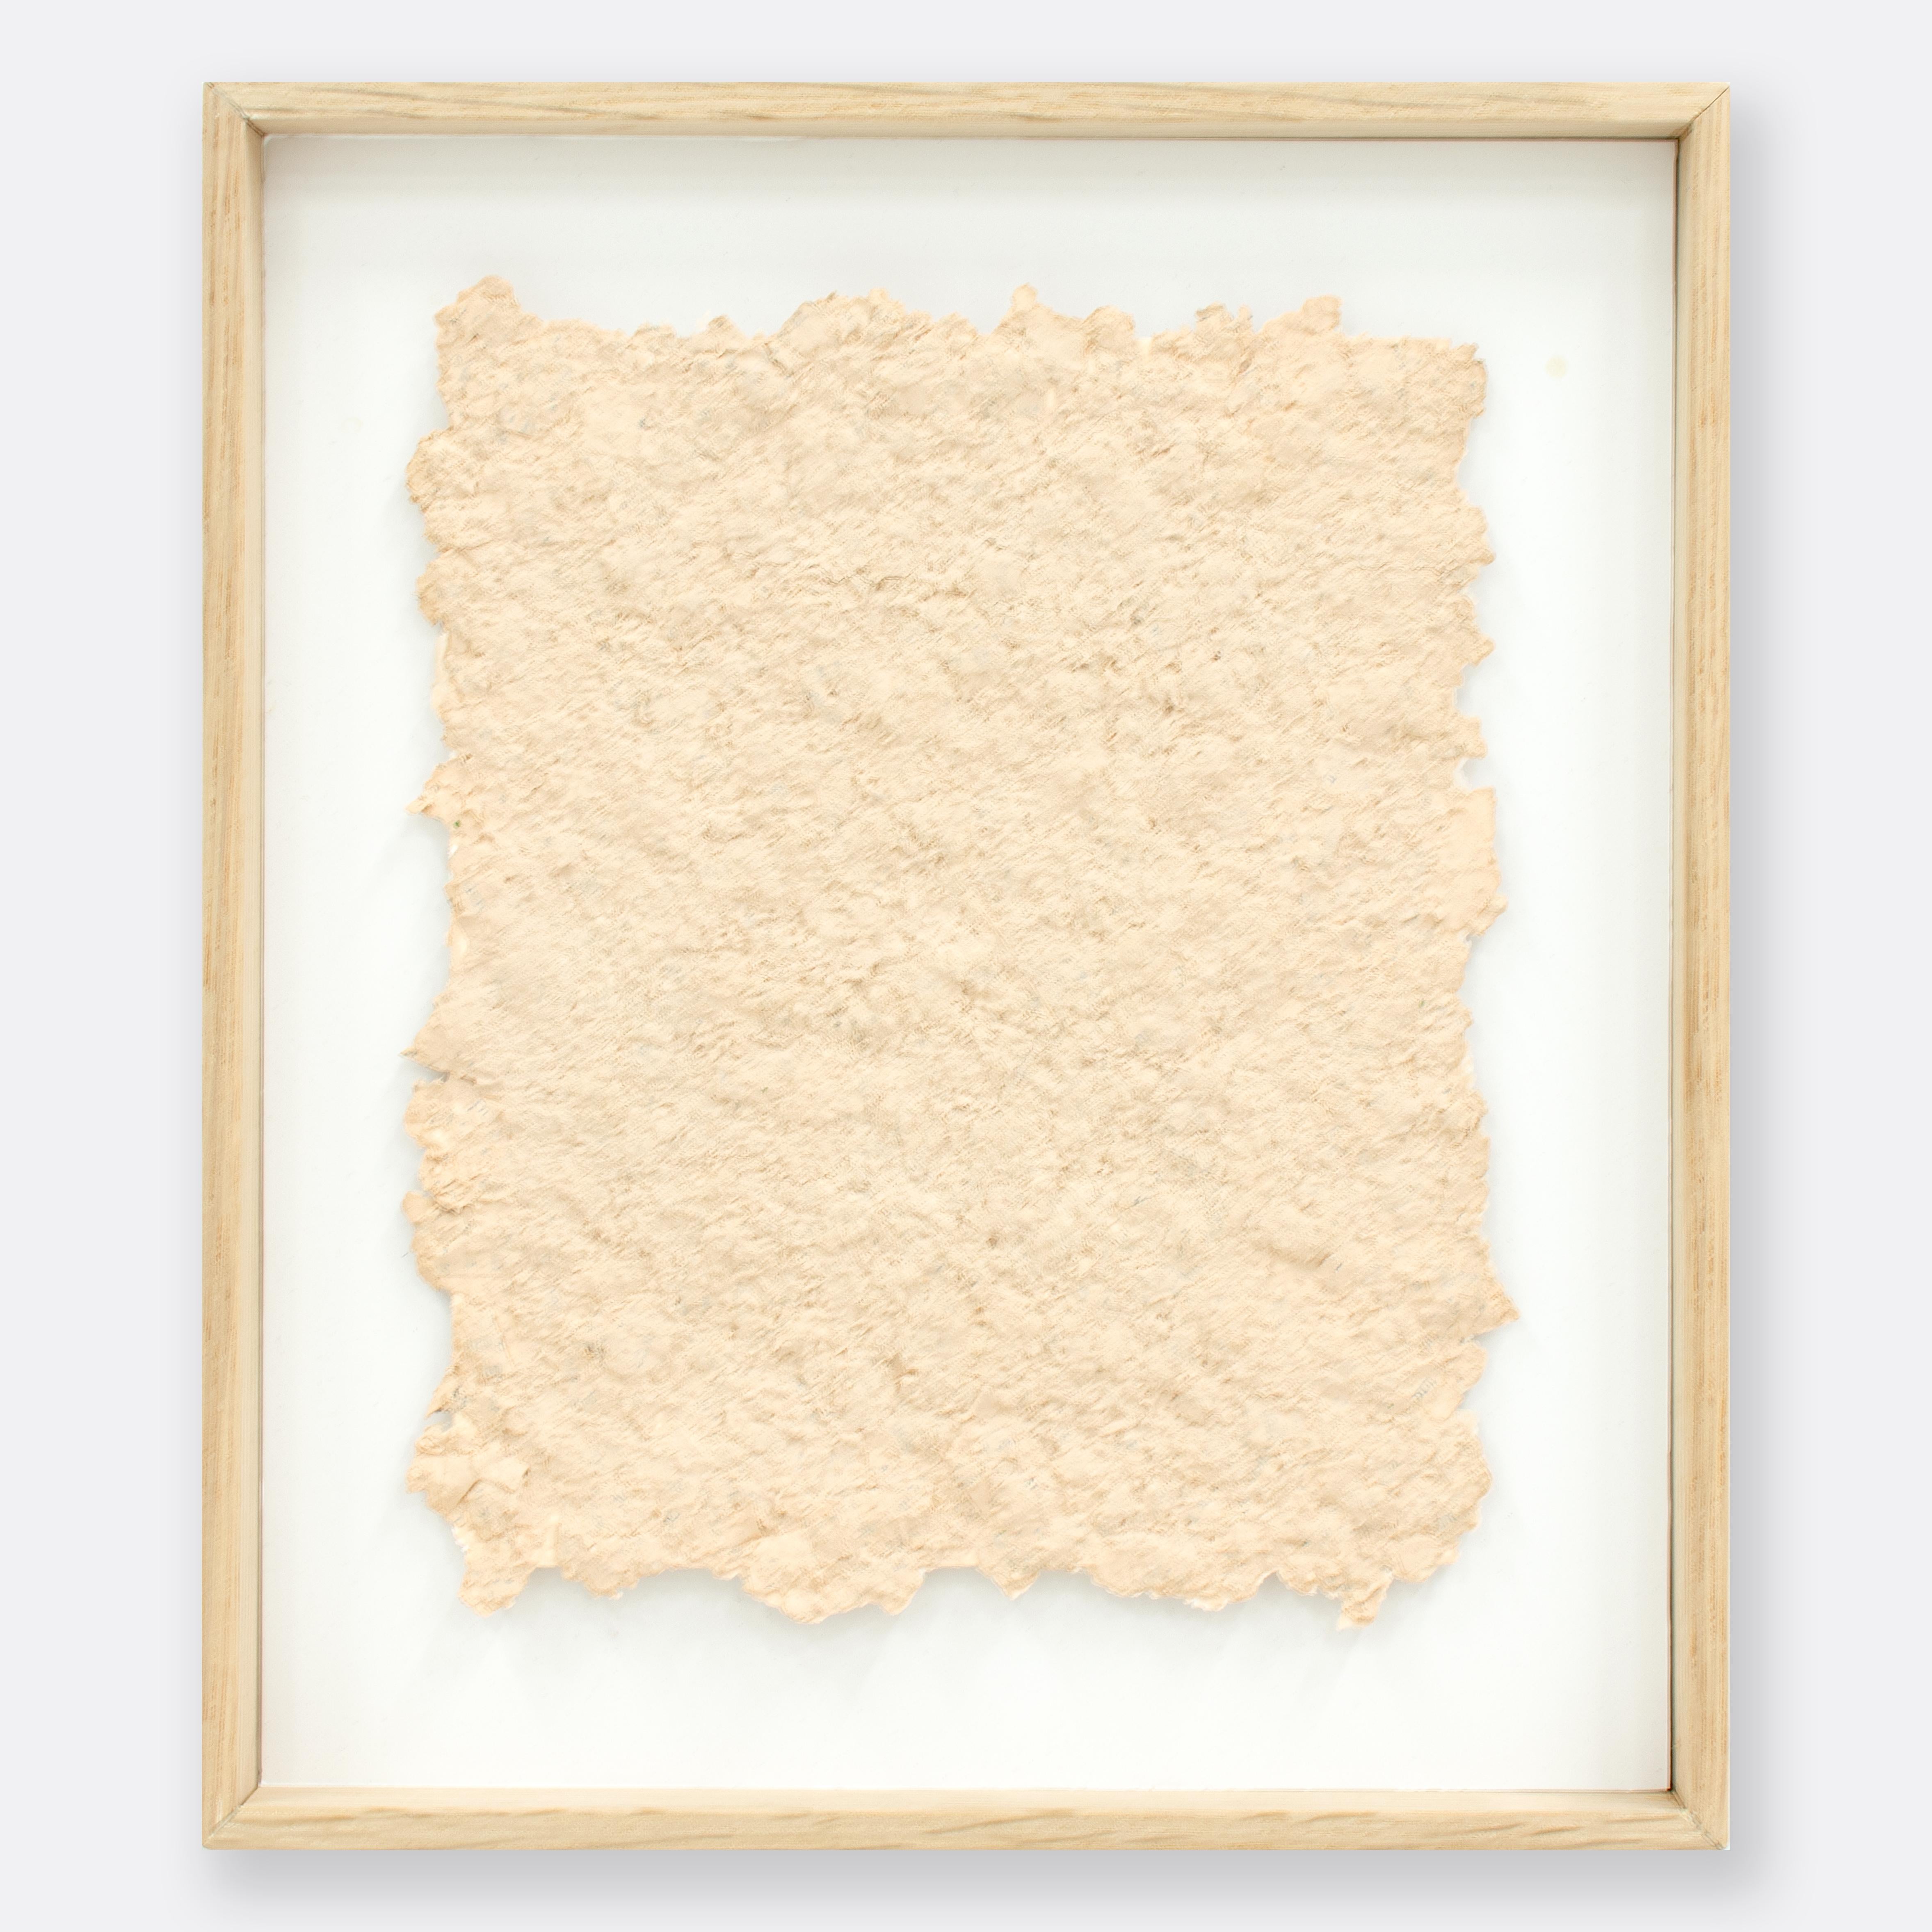 P 300 Series, Blush - textured book pages & pigment in open oak wood frame  - Mixed Media Art by Austin Kerr